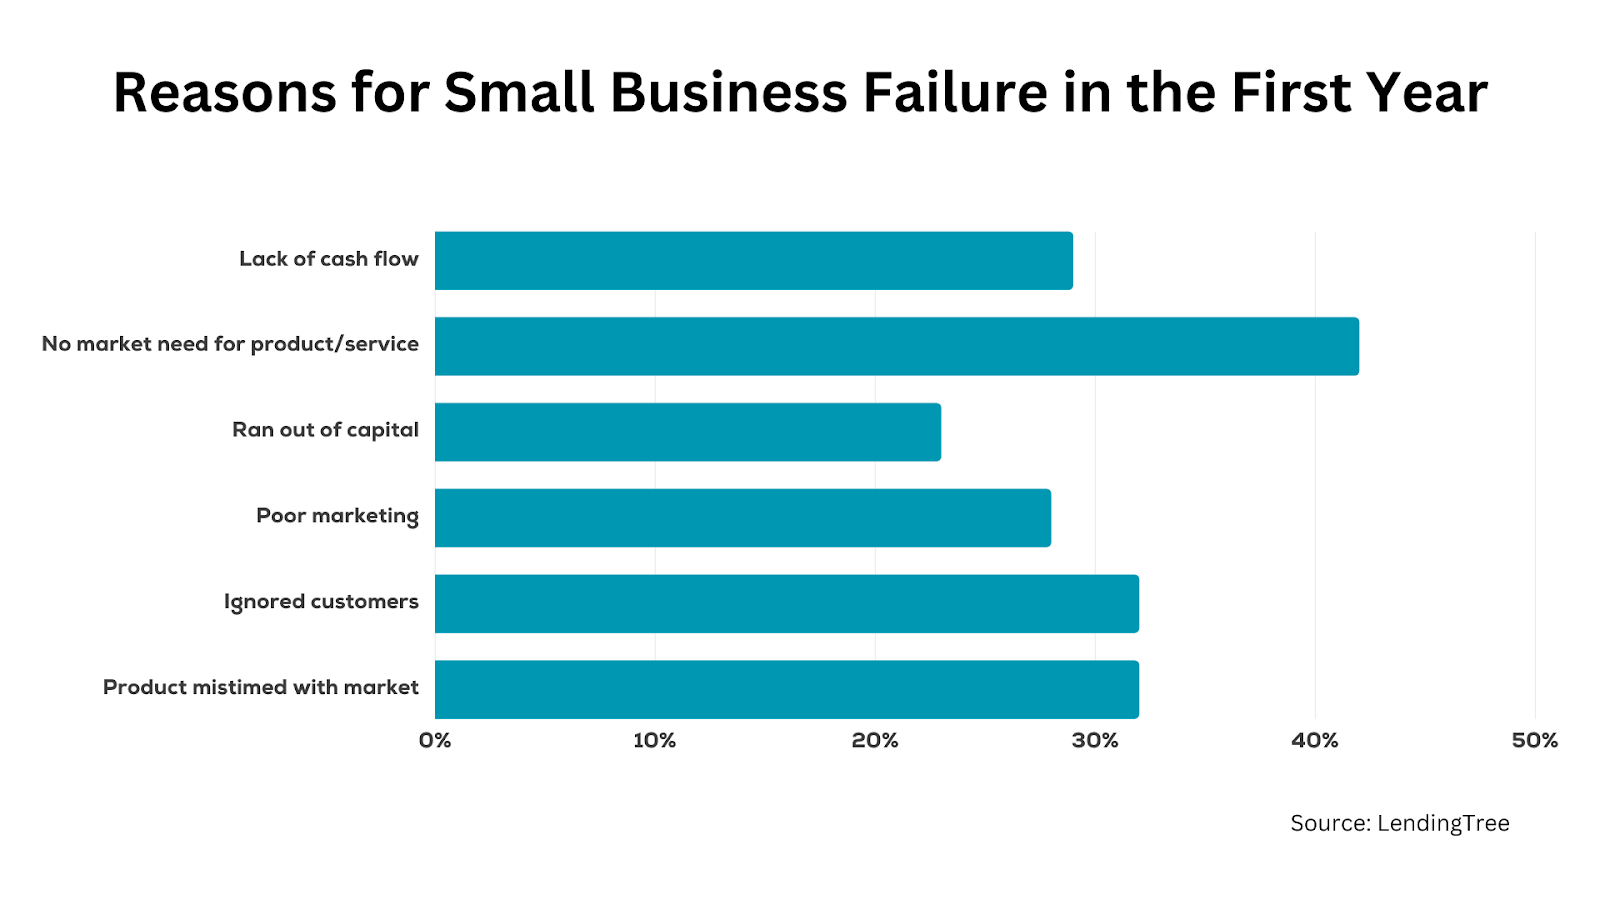 Reasons for Small Business Failure in the First Year